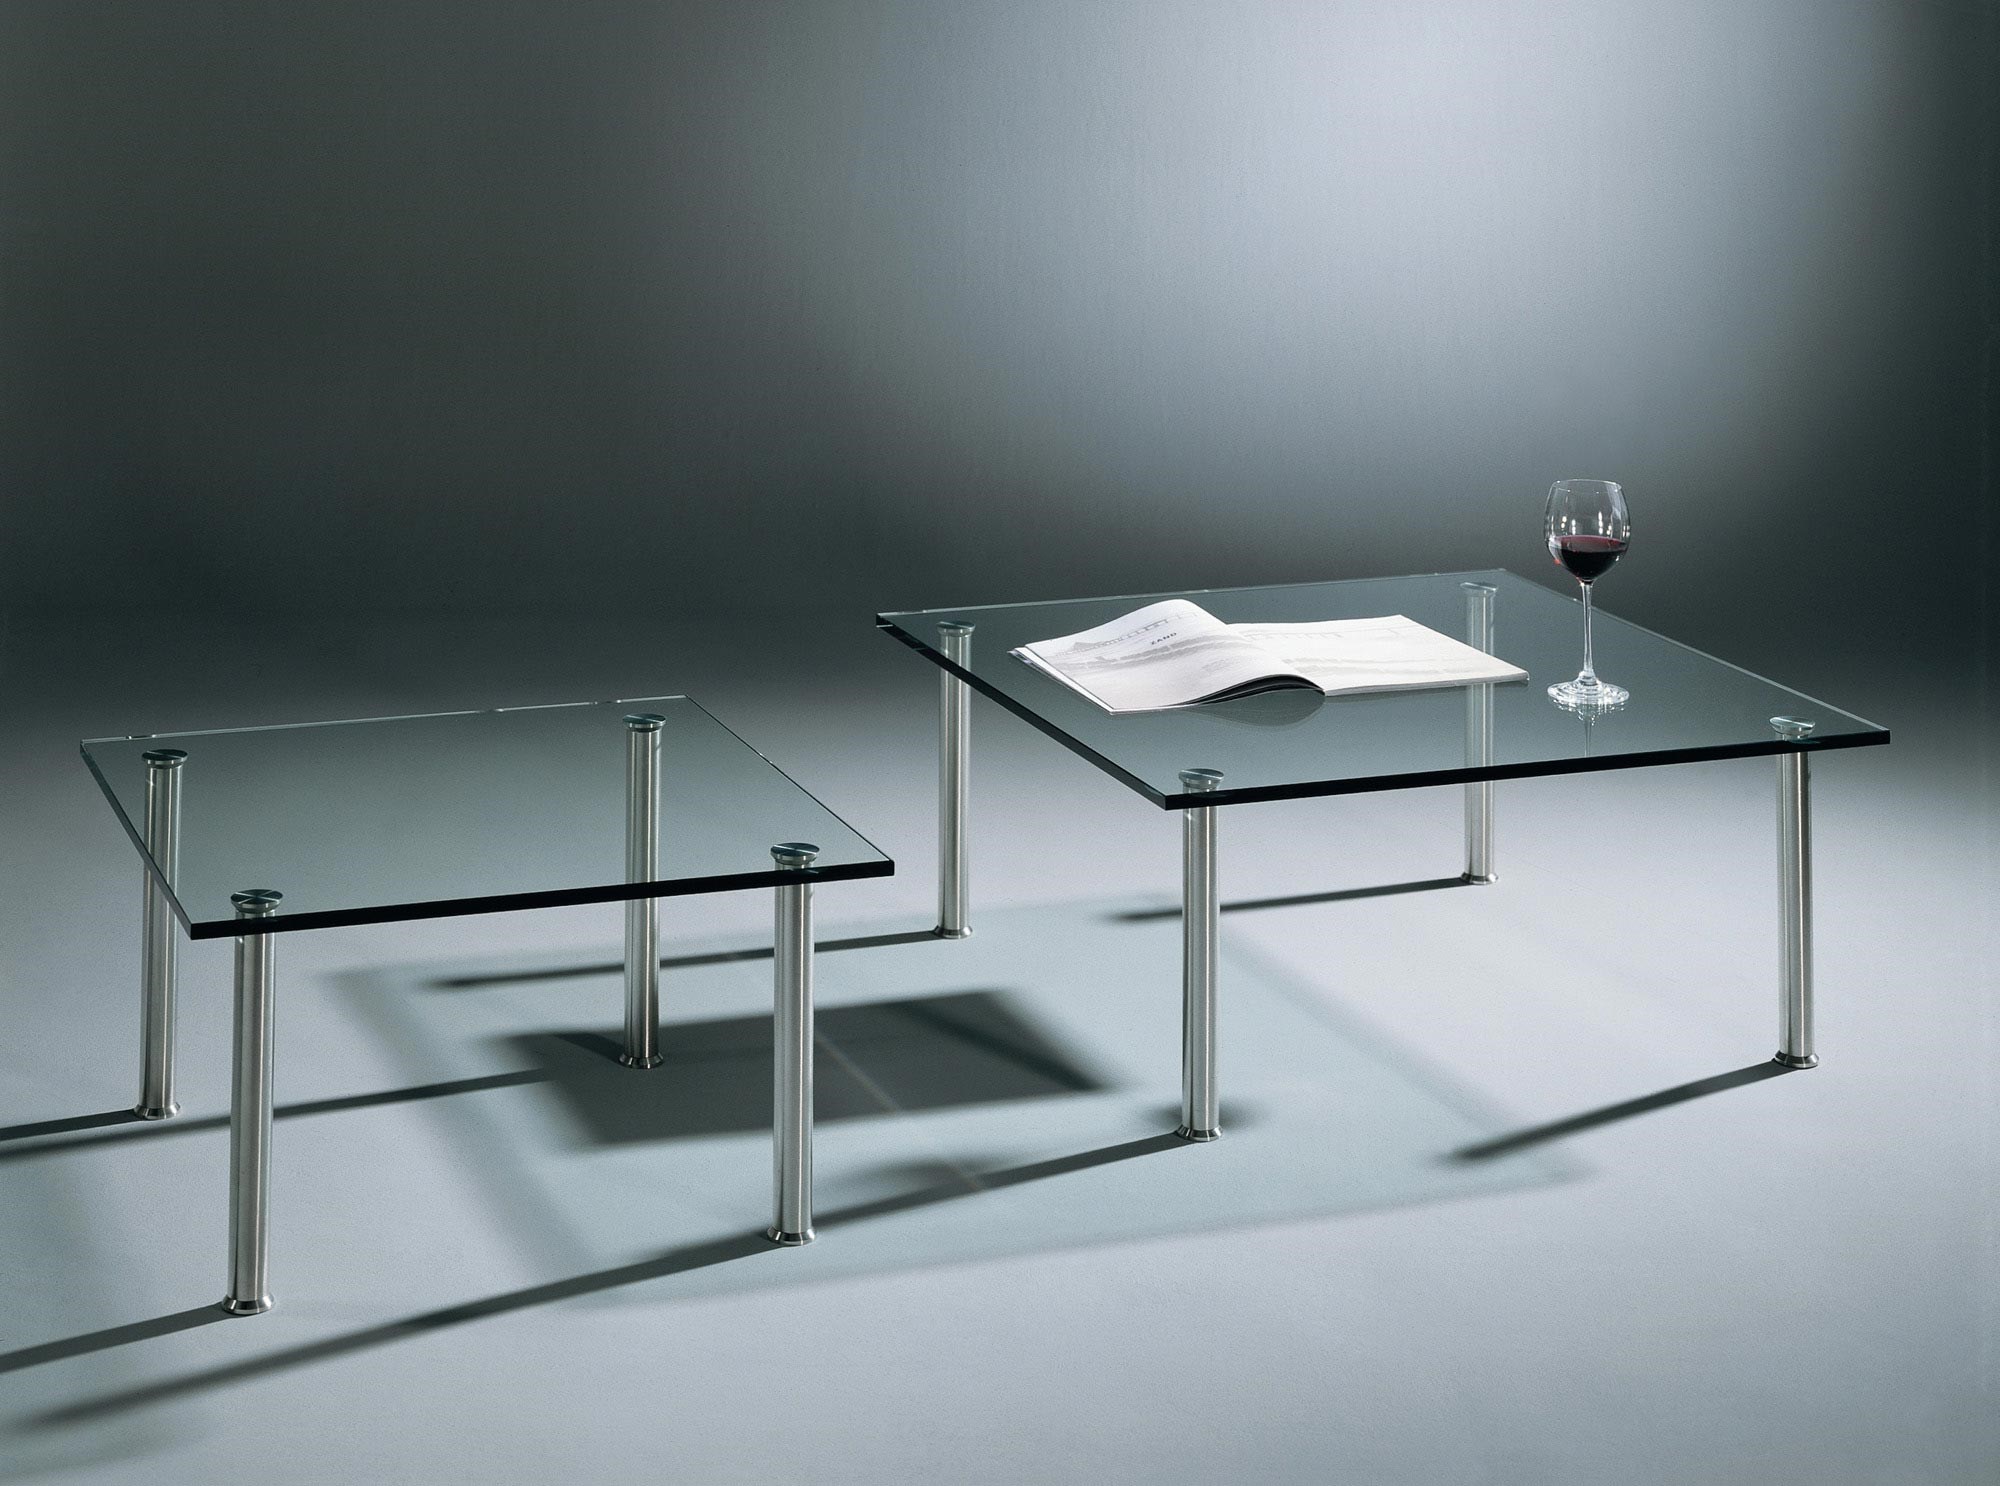 Glass cocktail table SIRIUS by DREIECK DESIGN:  S 7740 + 9940 - FLOATGLASS clear - straight corners - table feet stainless steel brushed